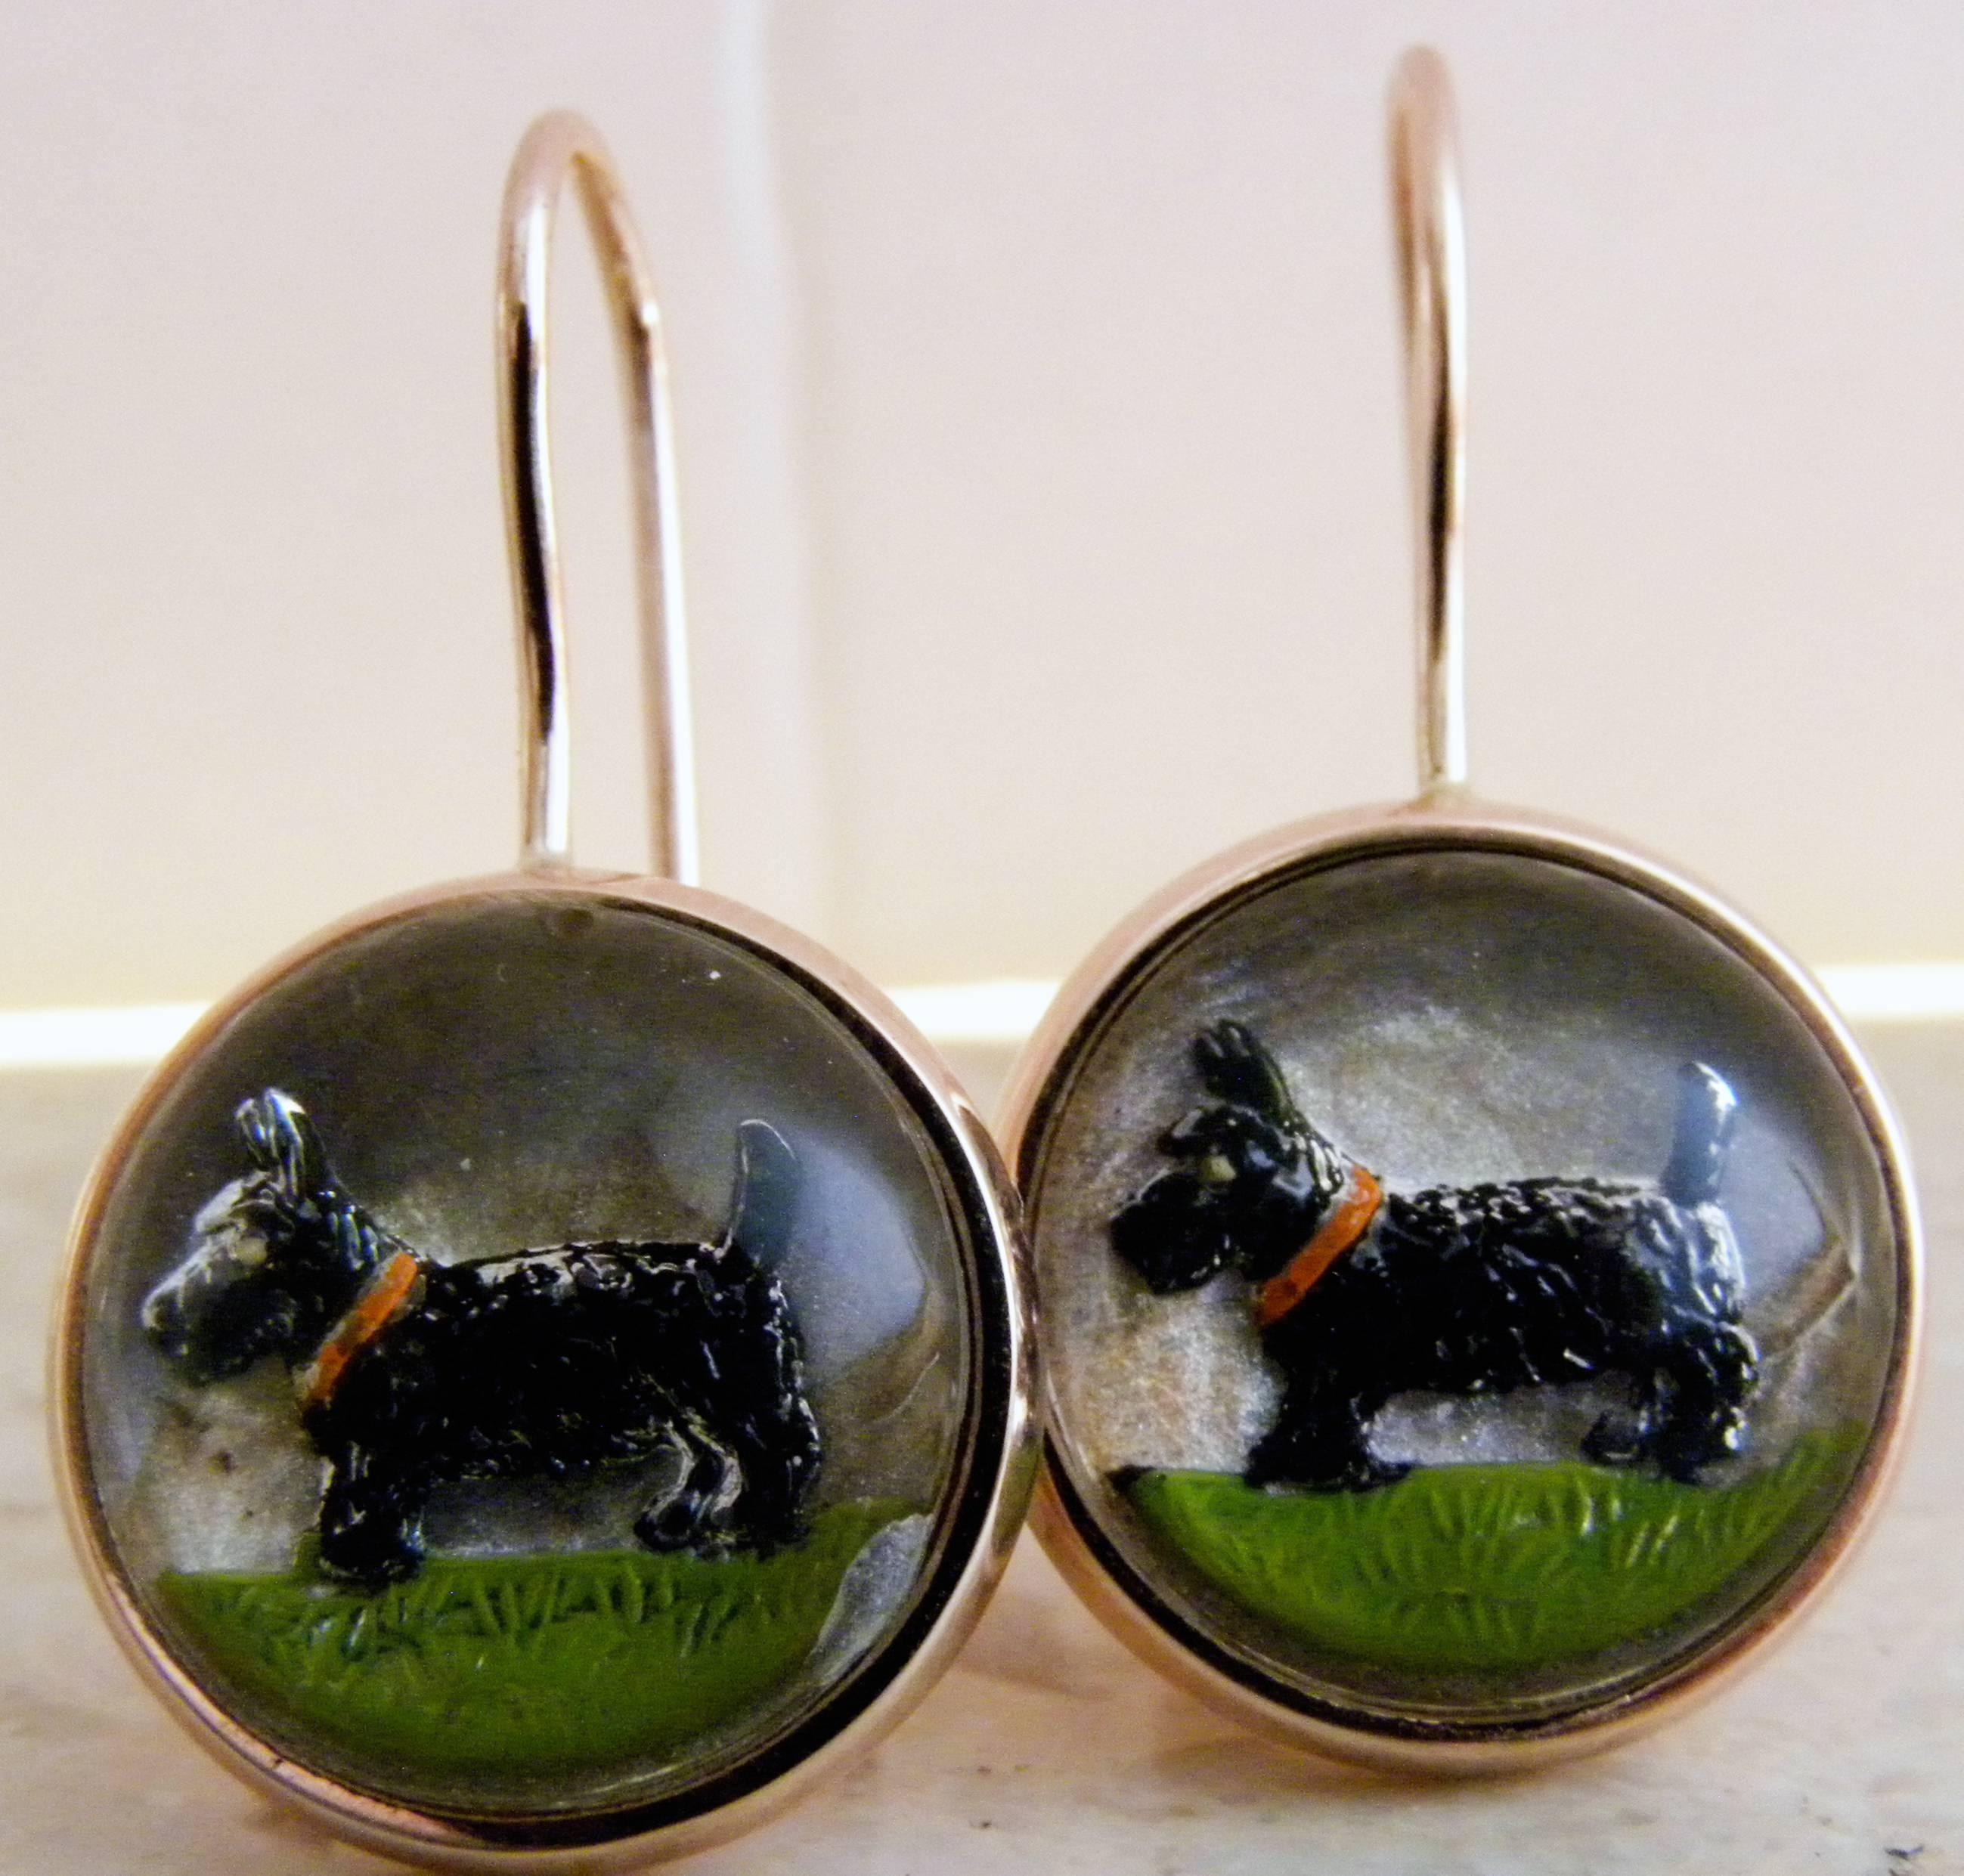 Essex or Reverse Painting Under Crystal Earrings featuring  a West Highland Black Terrier image, 9k rose gold setting.
During the fifties Giovanni Berca used to collect Essex Glasses and create unique pieces of jewelry for his family and friends.
We